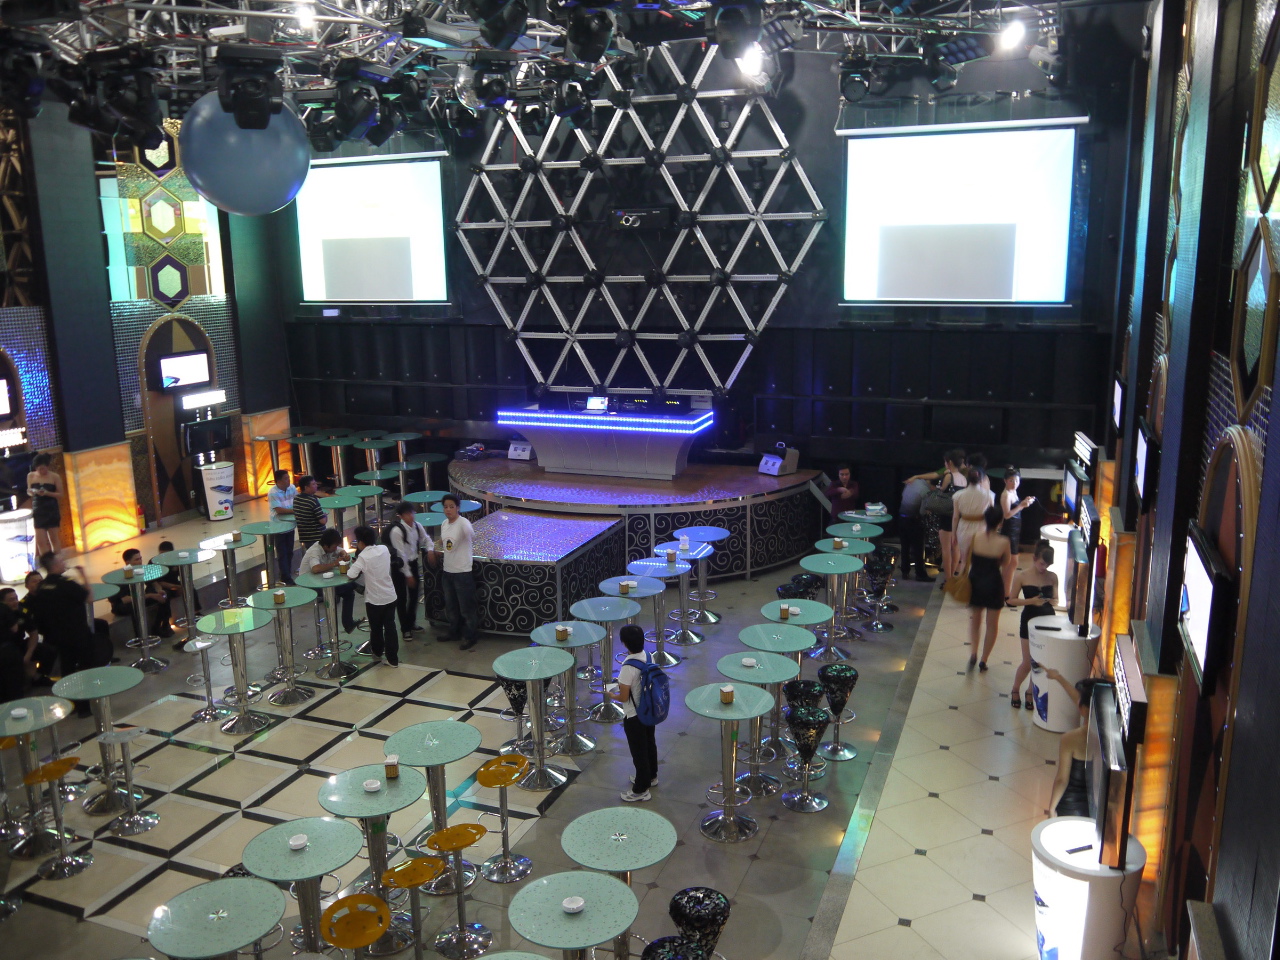 Canalis Nightclub Opens In Vietnam With dbx Compression and Other HARMAN Brand Products